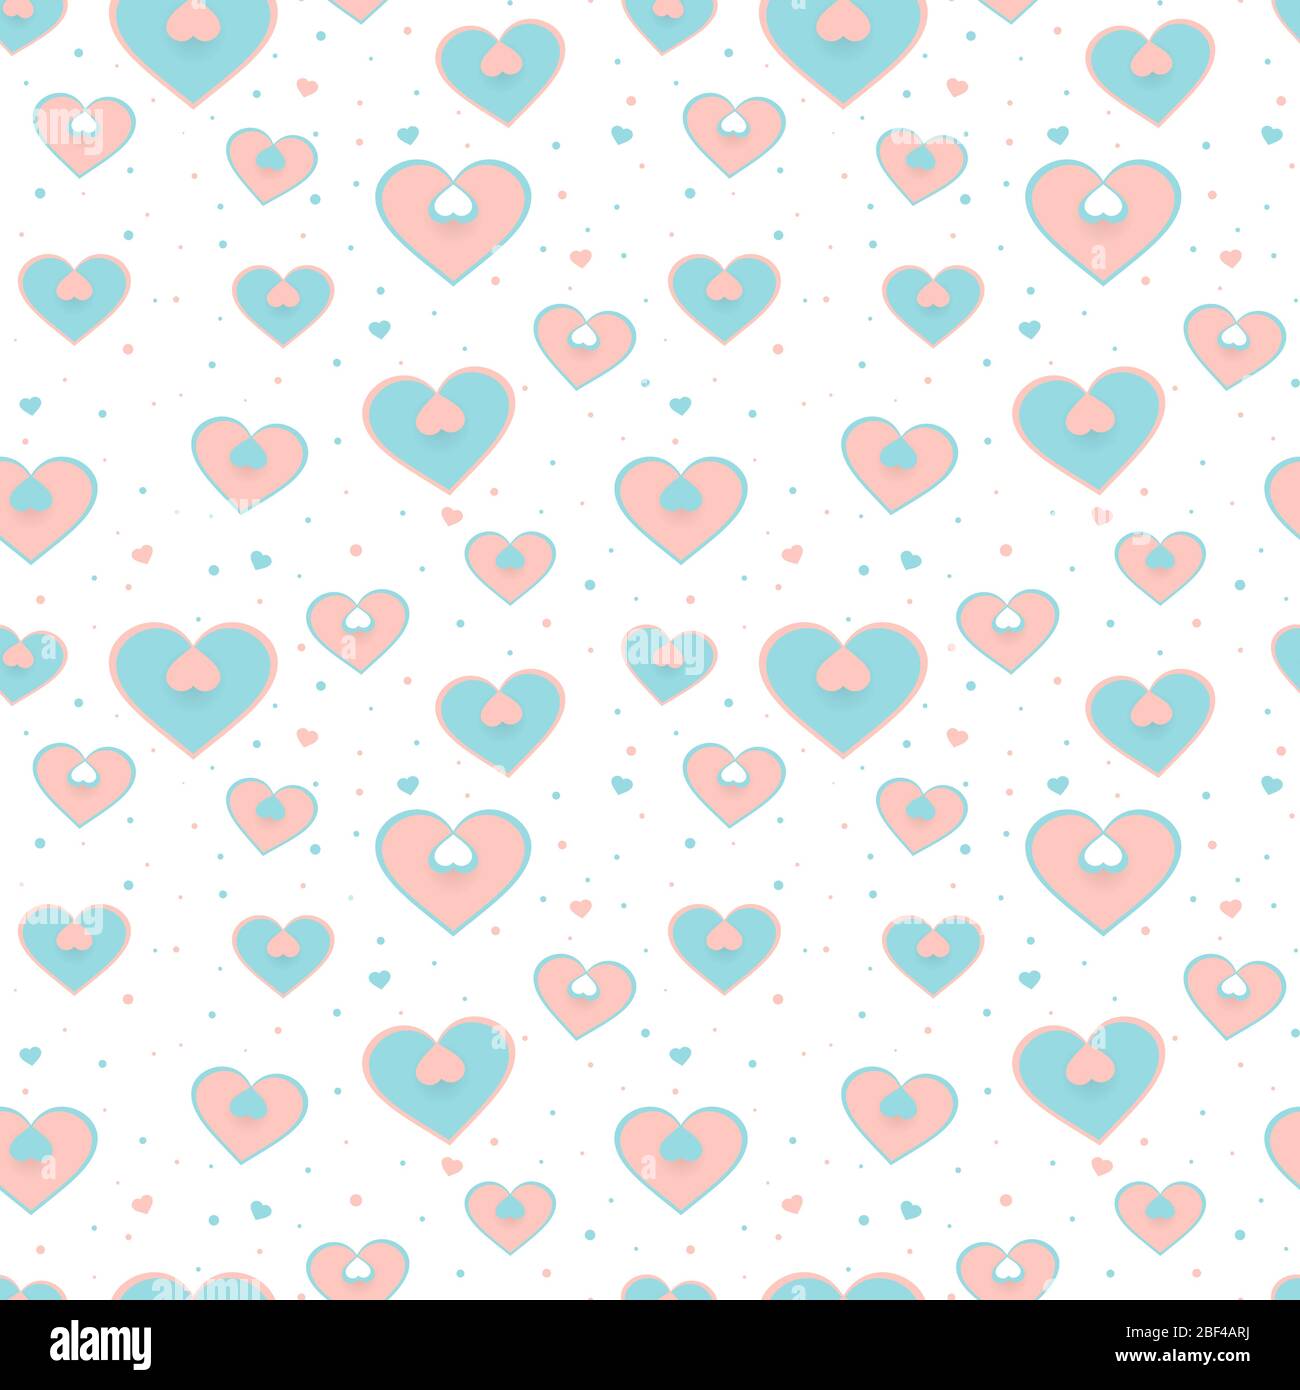 Soft pastel square seamless background. Grey, pink and blue square.  Abstract pattern for card, wallpaper, album, scrapbook, holiday wrapping  paper, textile fabric, garment, t-shirt design etc Stock Vector